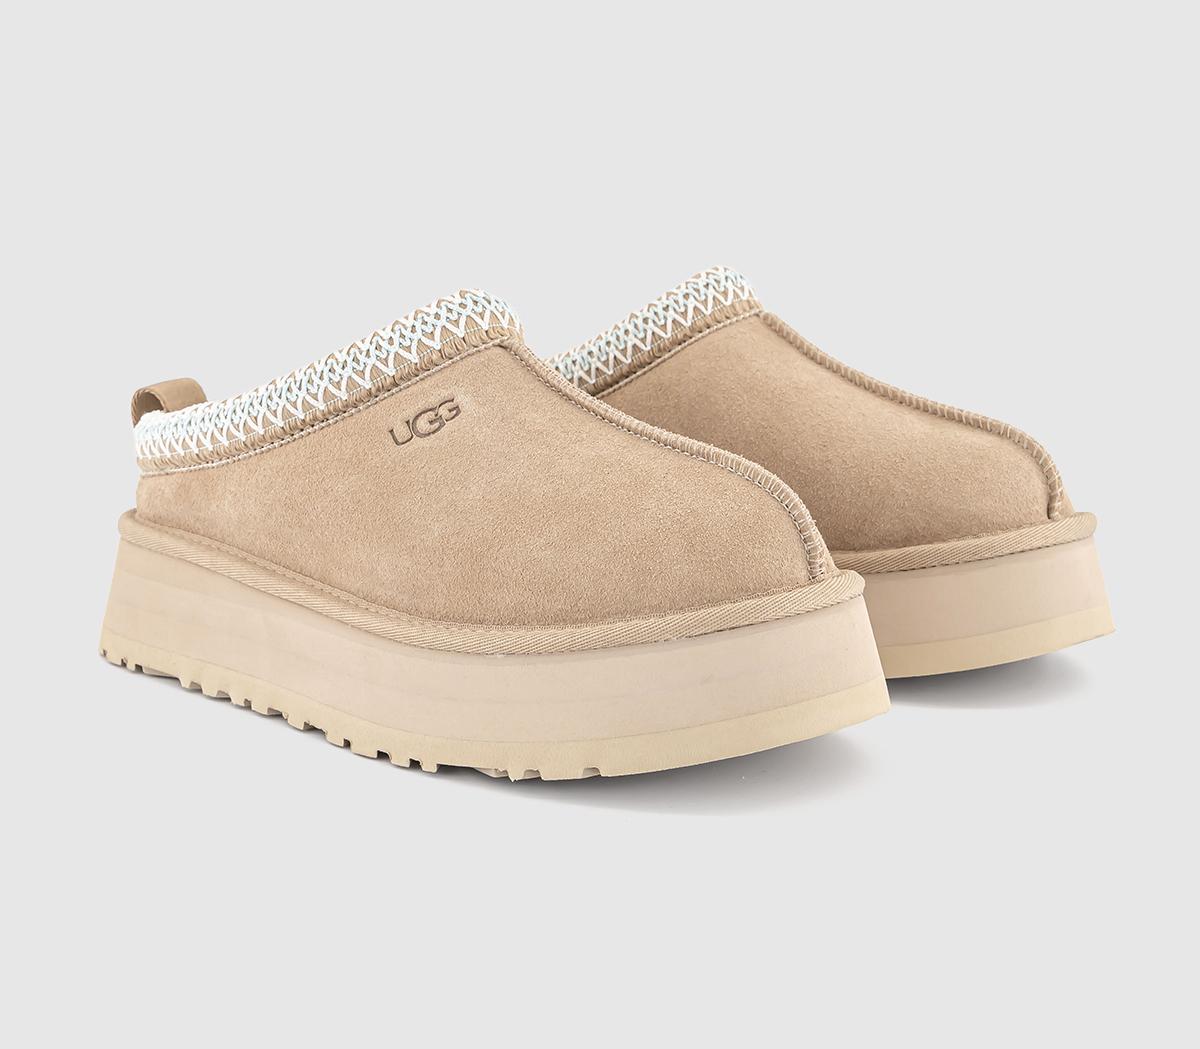 UGG Tazz Slippers Sand - Flat Shoes for Women